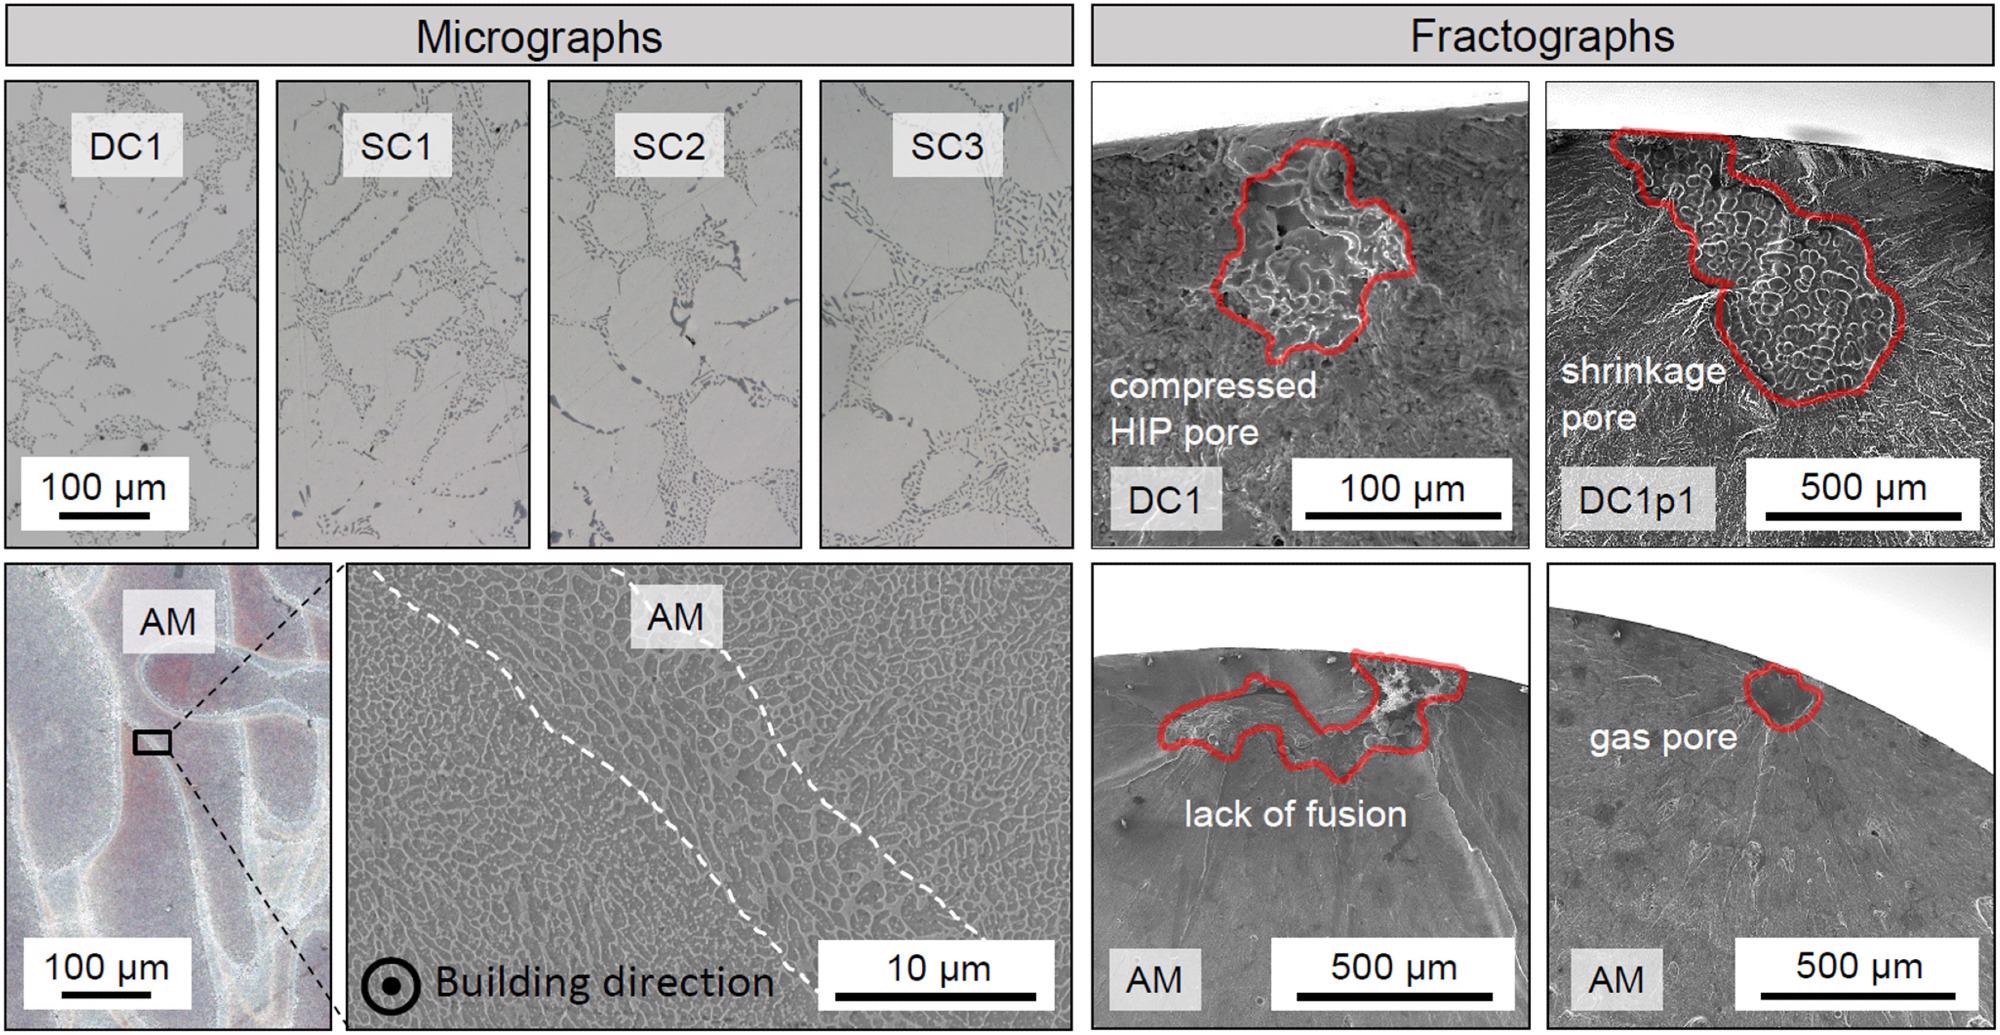 Representative OM and SEM micrographs (left) as well as SEM fractographs (right) of DC and SC AlSi7Mg alloy (top) and AM AlSi10Mg alloy (bottom).